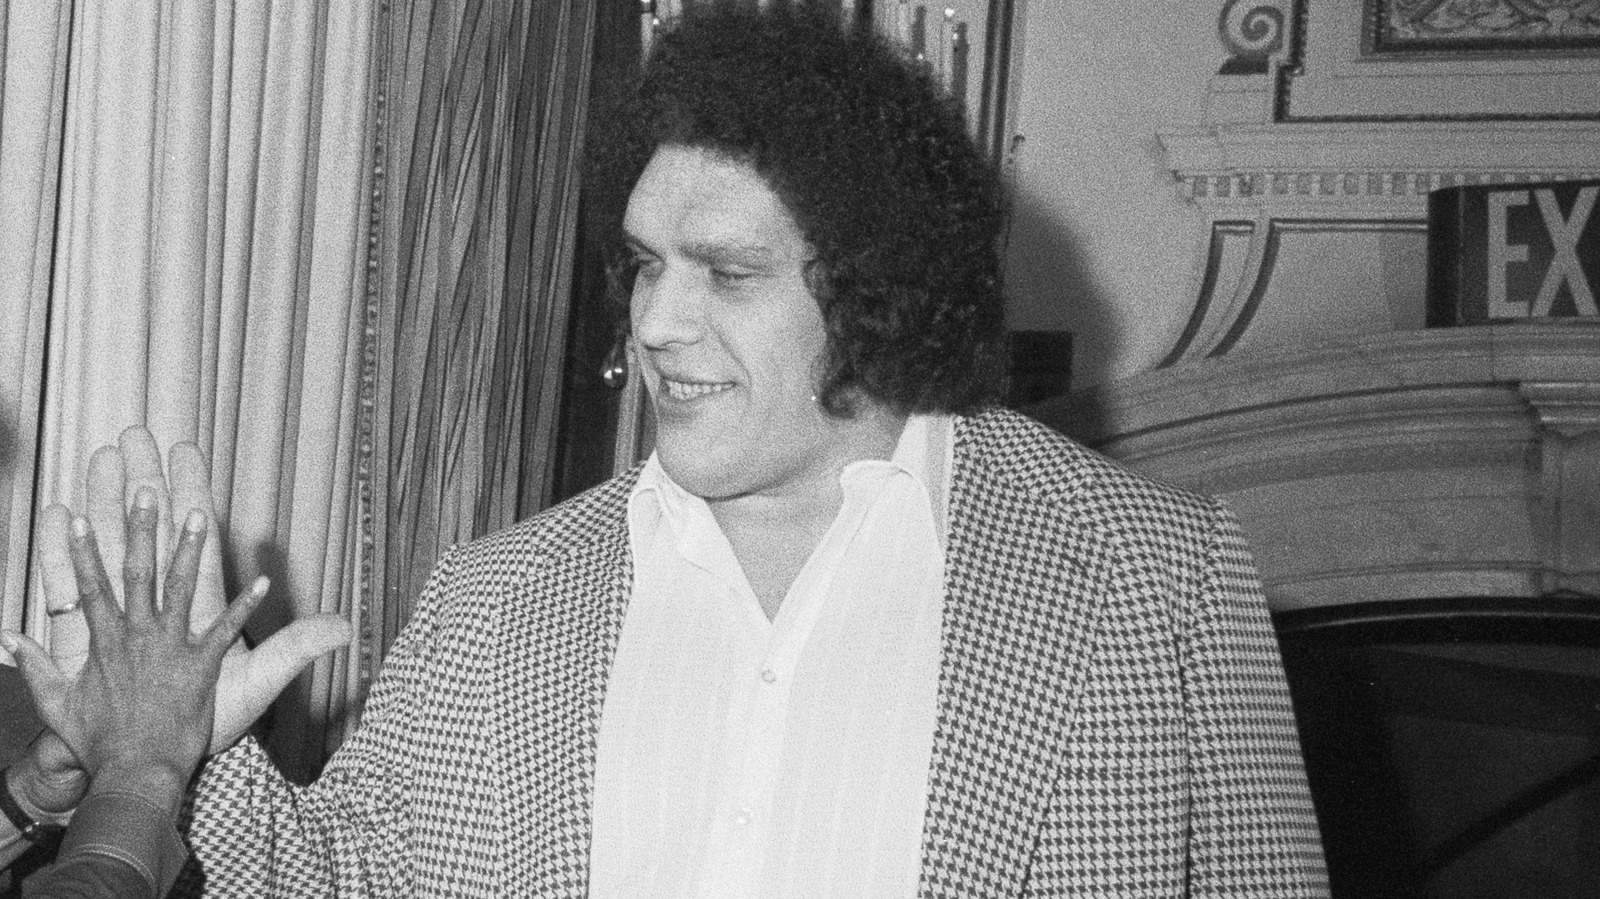 The Rise And Fall Of Andre The Giant – Grunge